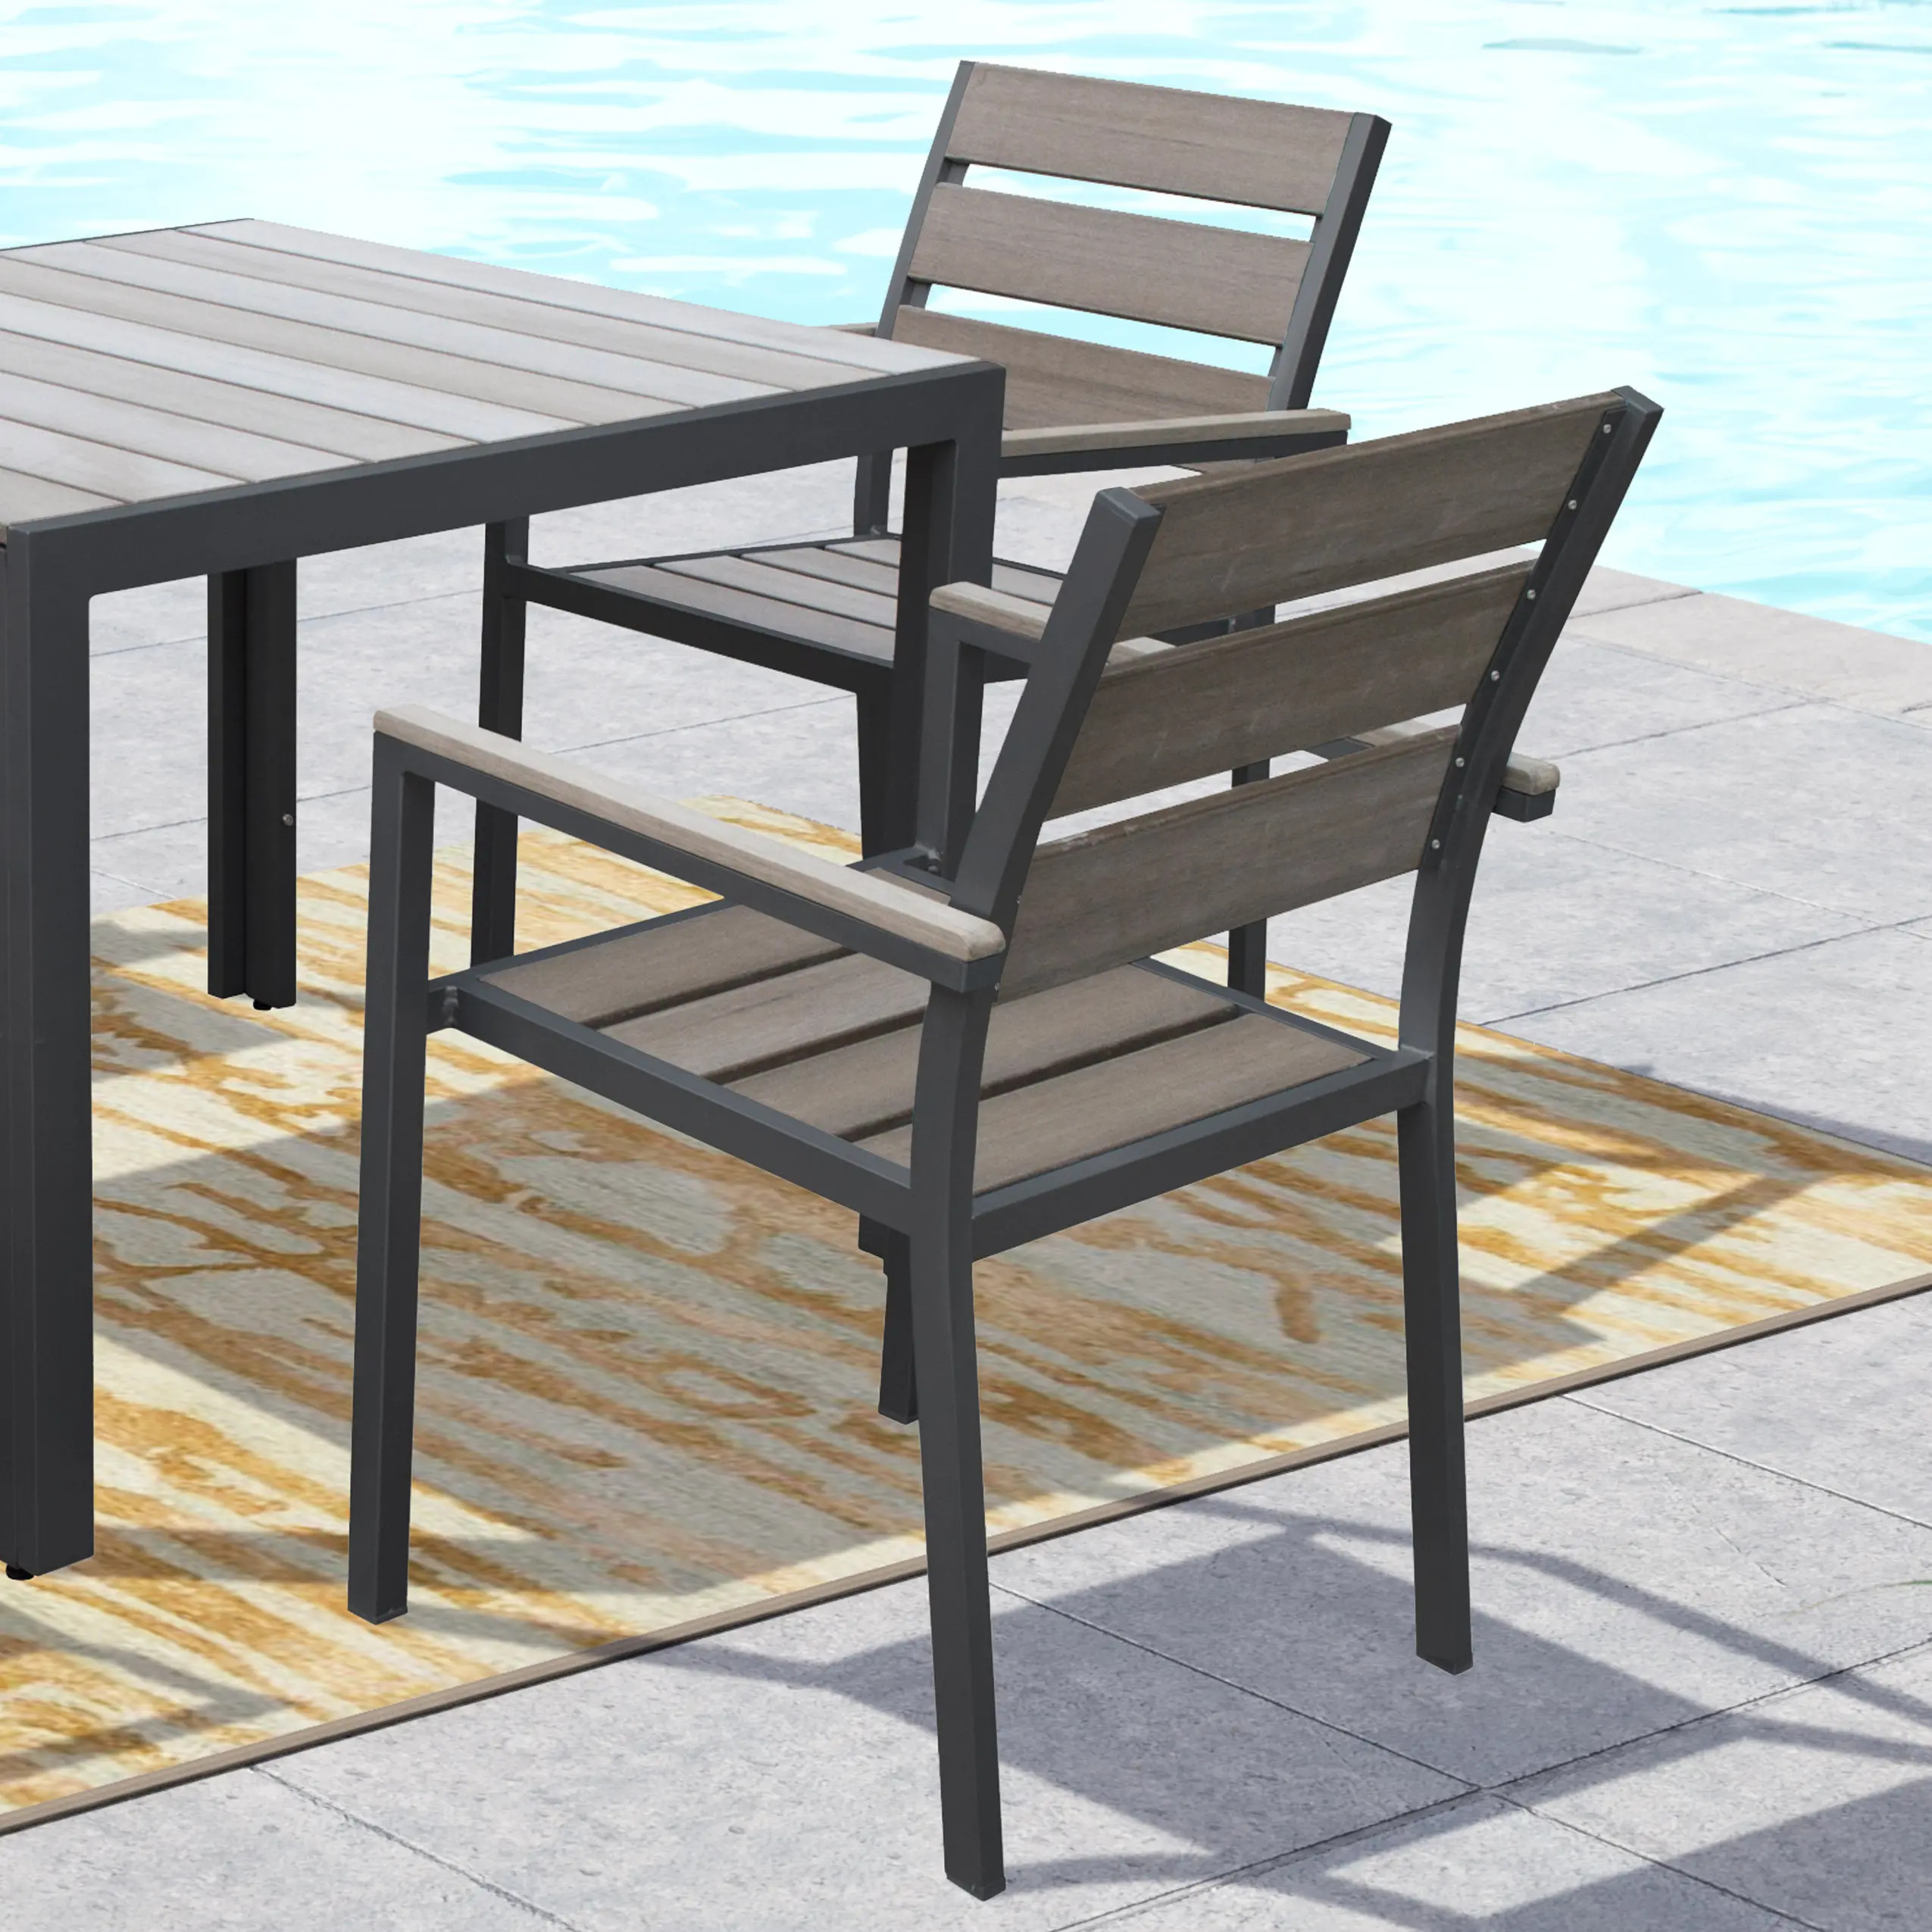 PJR-671-C Gallant Sun Bleached Black Outdoor Dining Chairs,  sku PJR-671-C